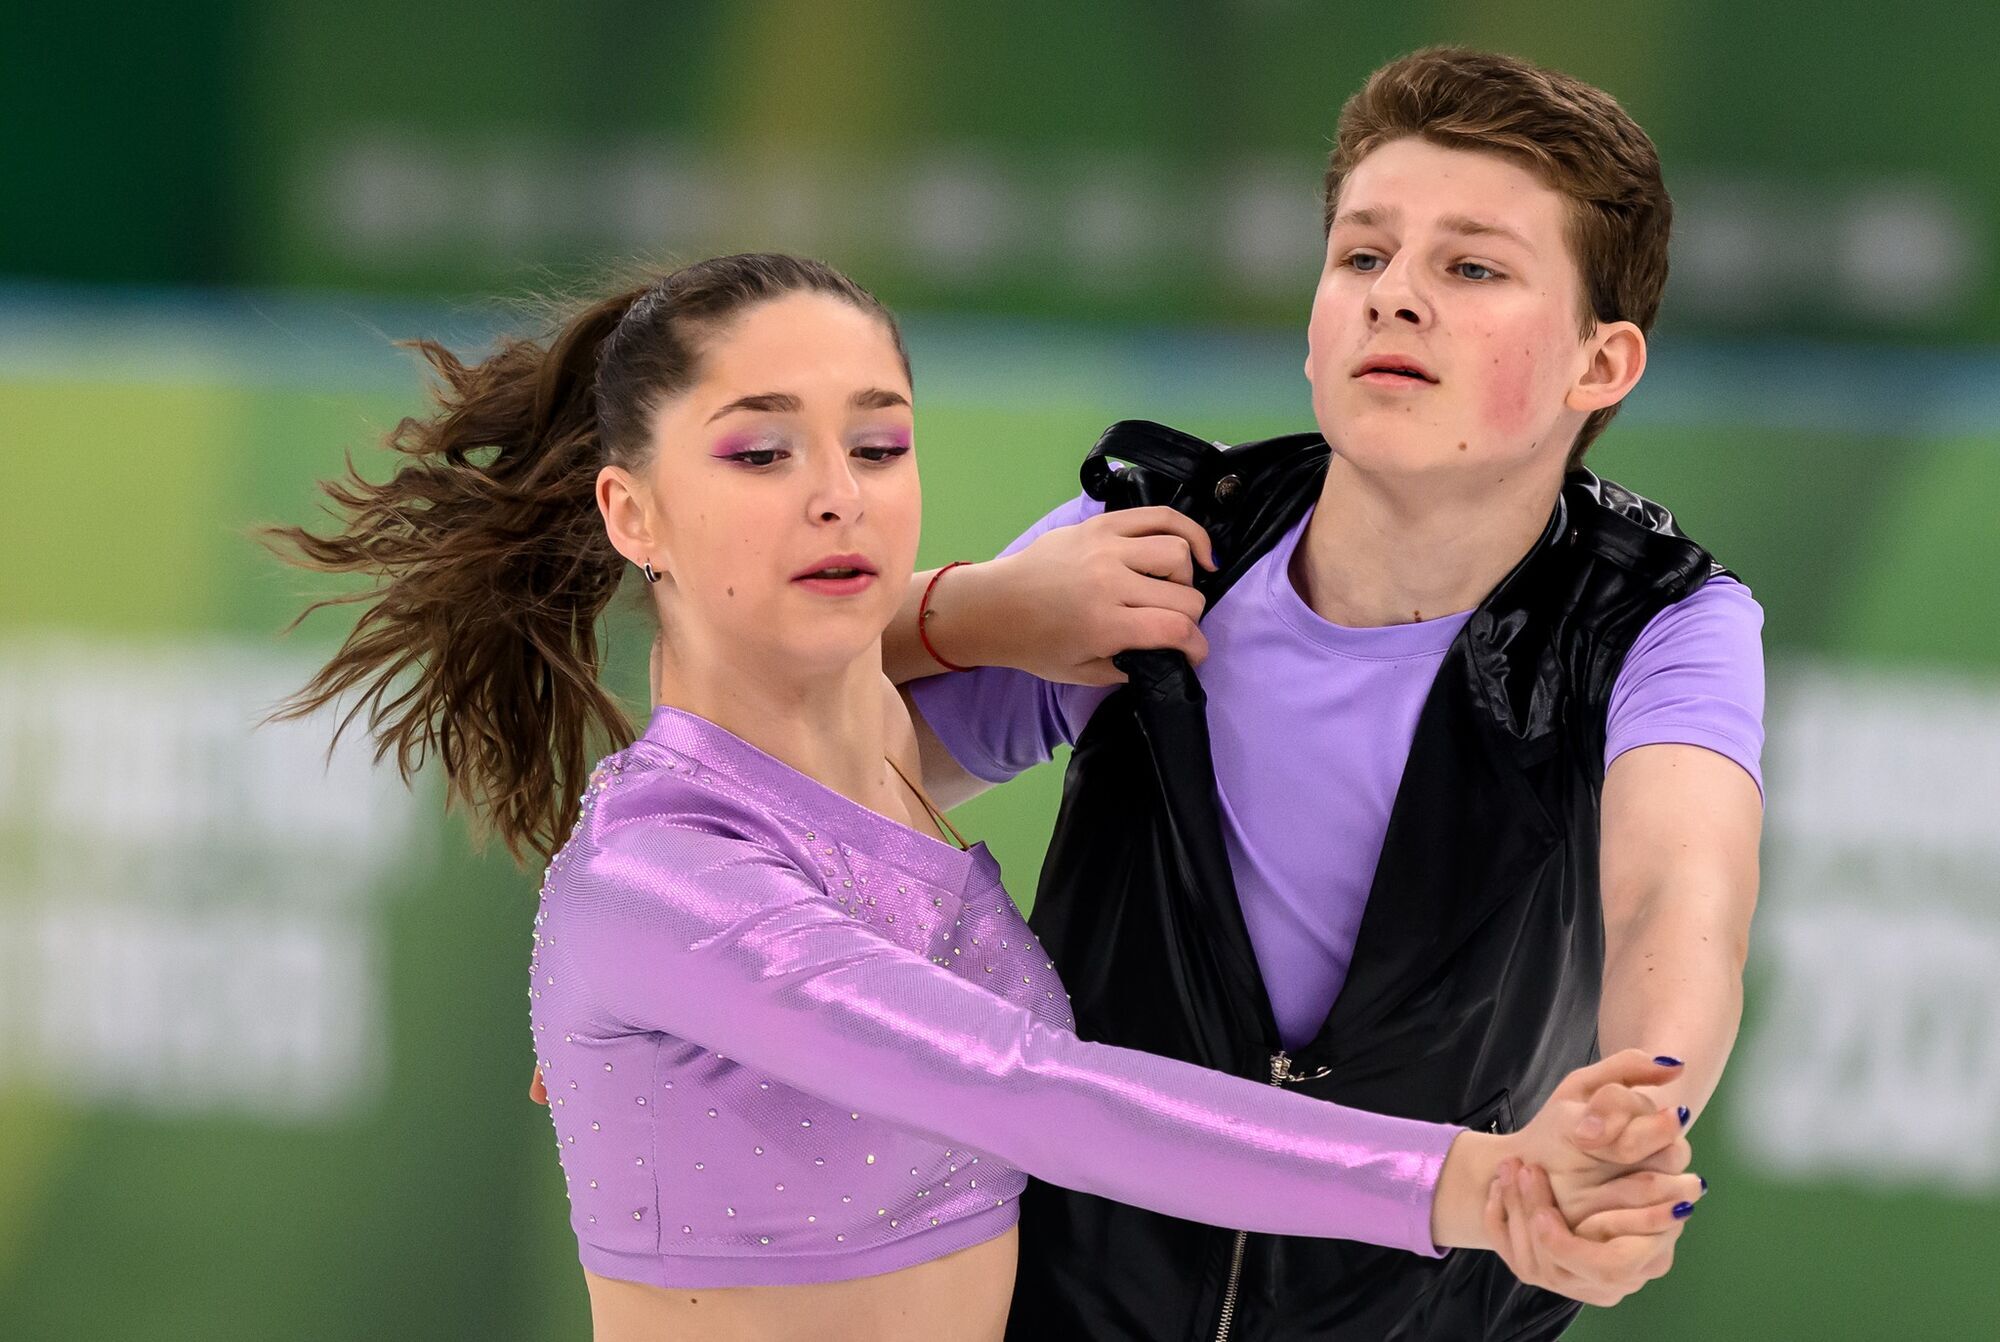 They almost ended their careers because of the war: 15-year-old Ukrainian figure skaters start at the World Junior Championships